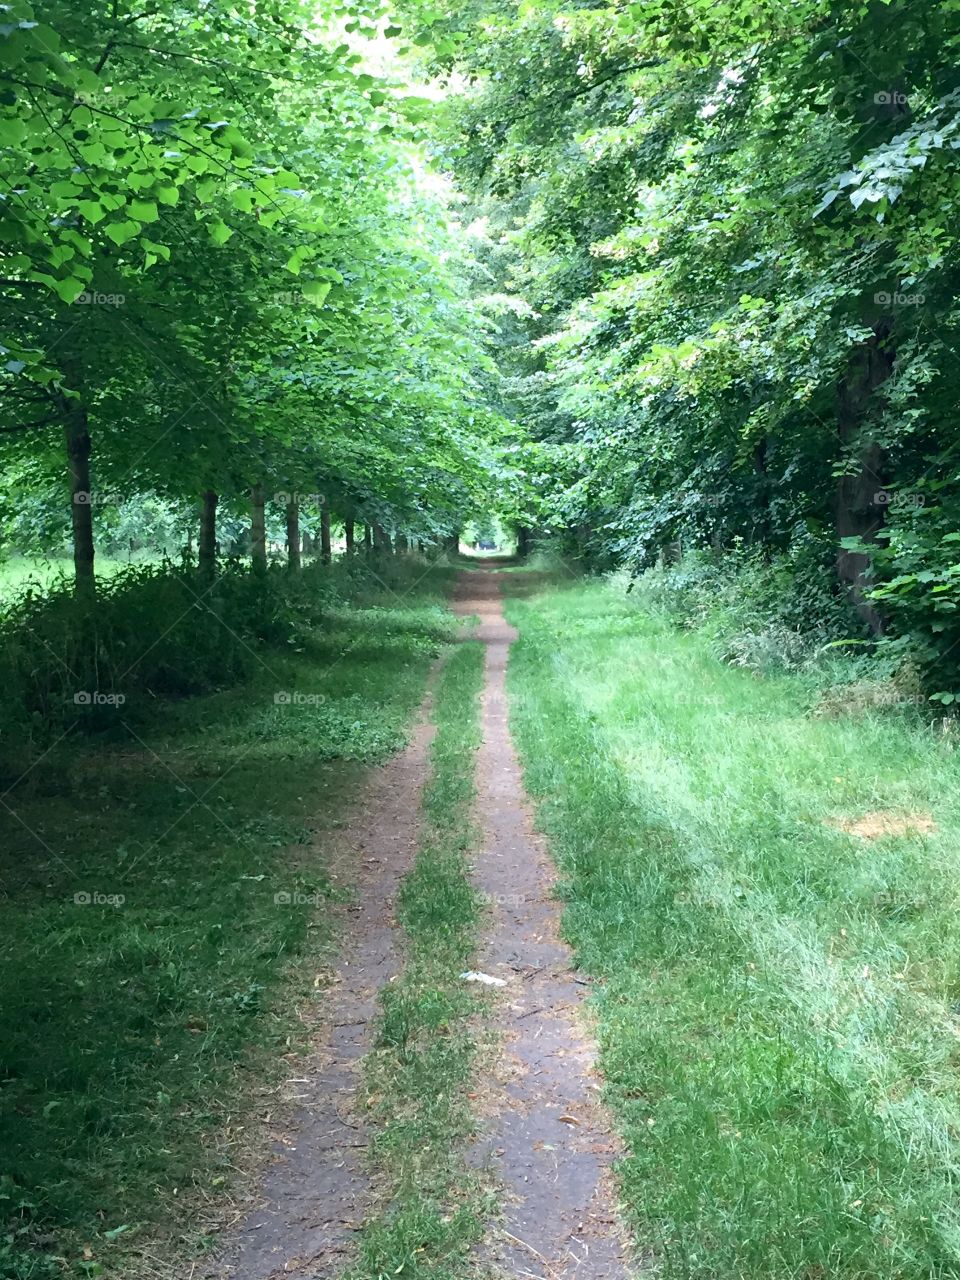 Cart Pat . Cart path through wooded area in the garden of Versailles.
